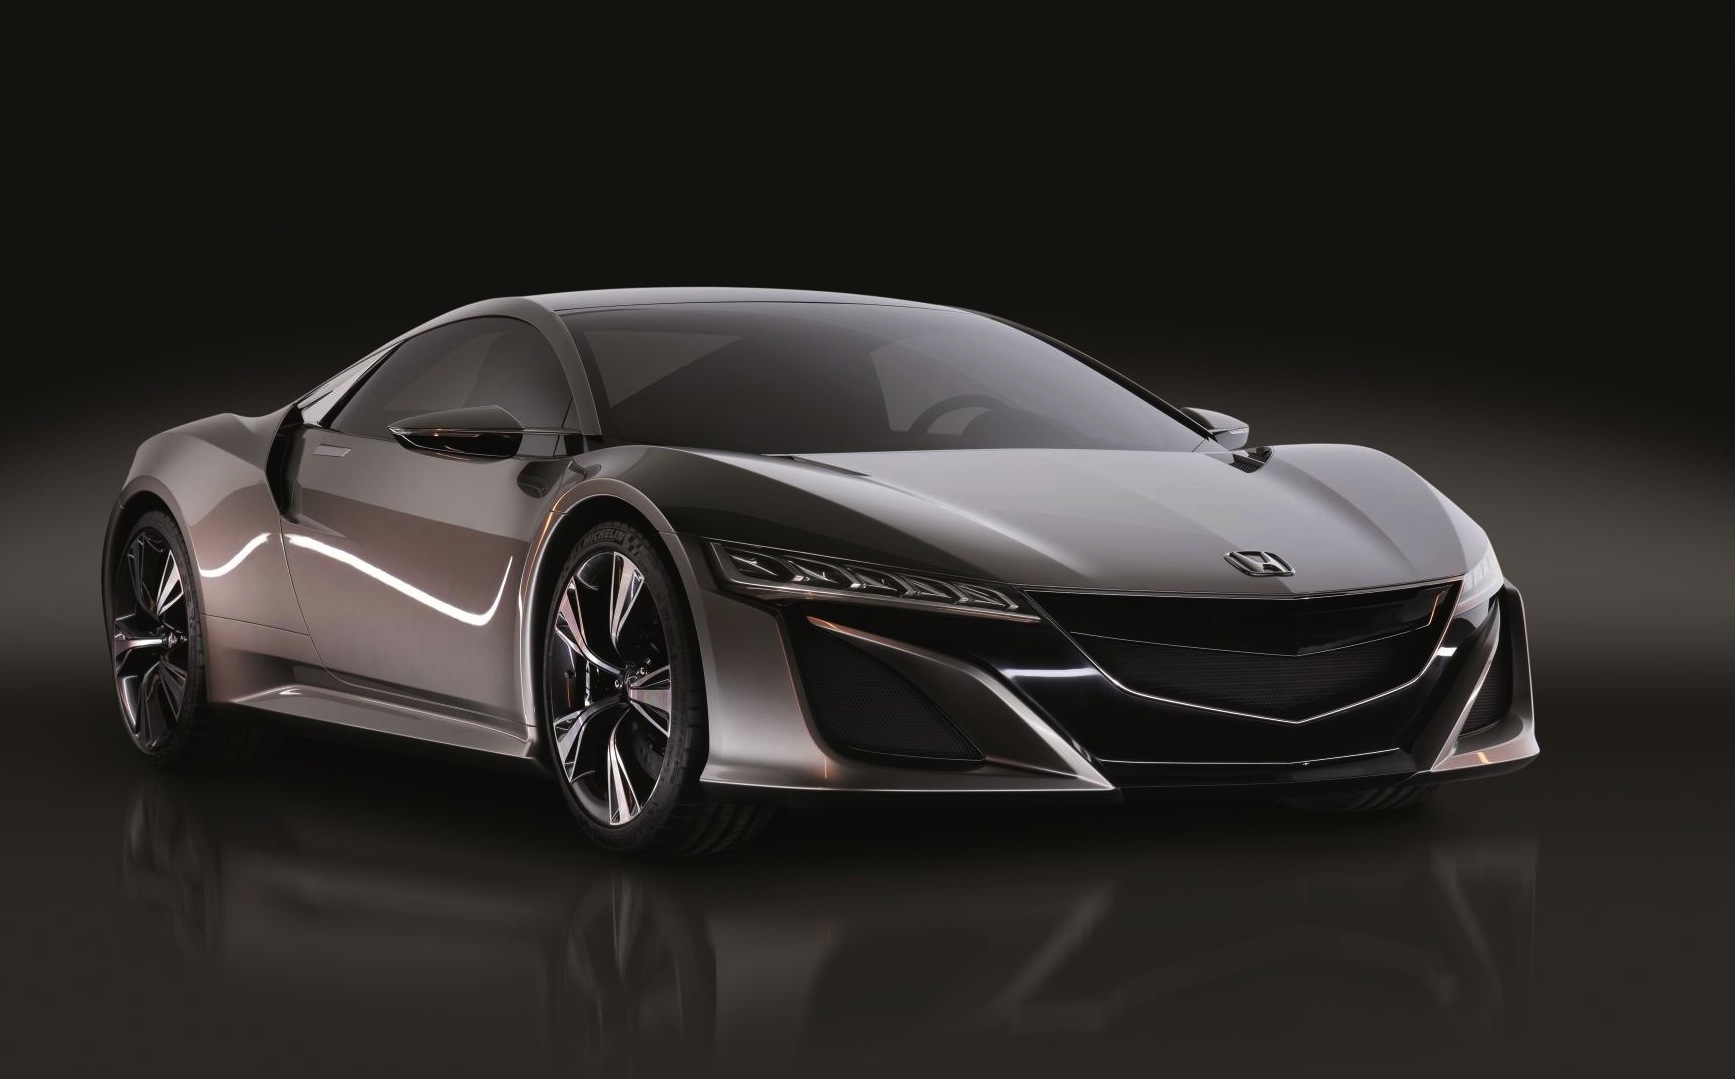 2015 Honda NSX already sold out in the UK – report